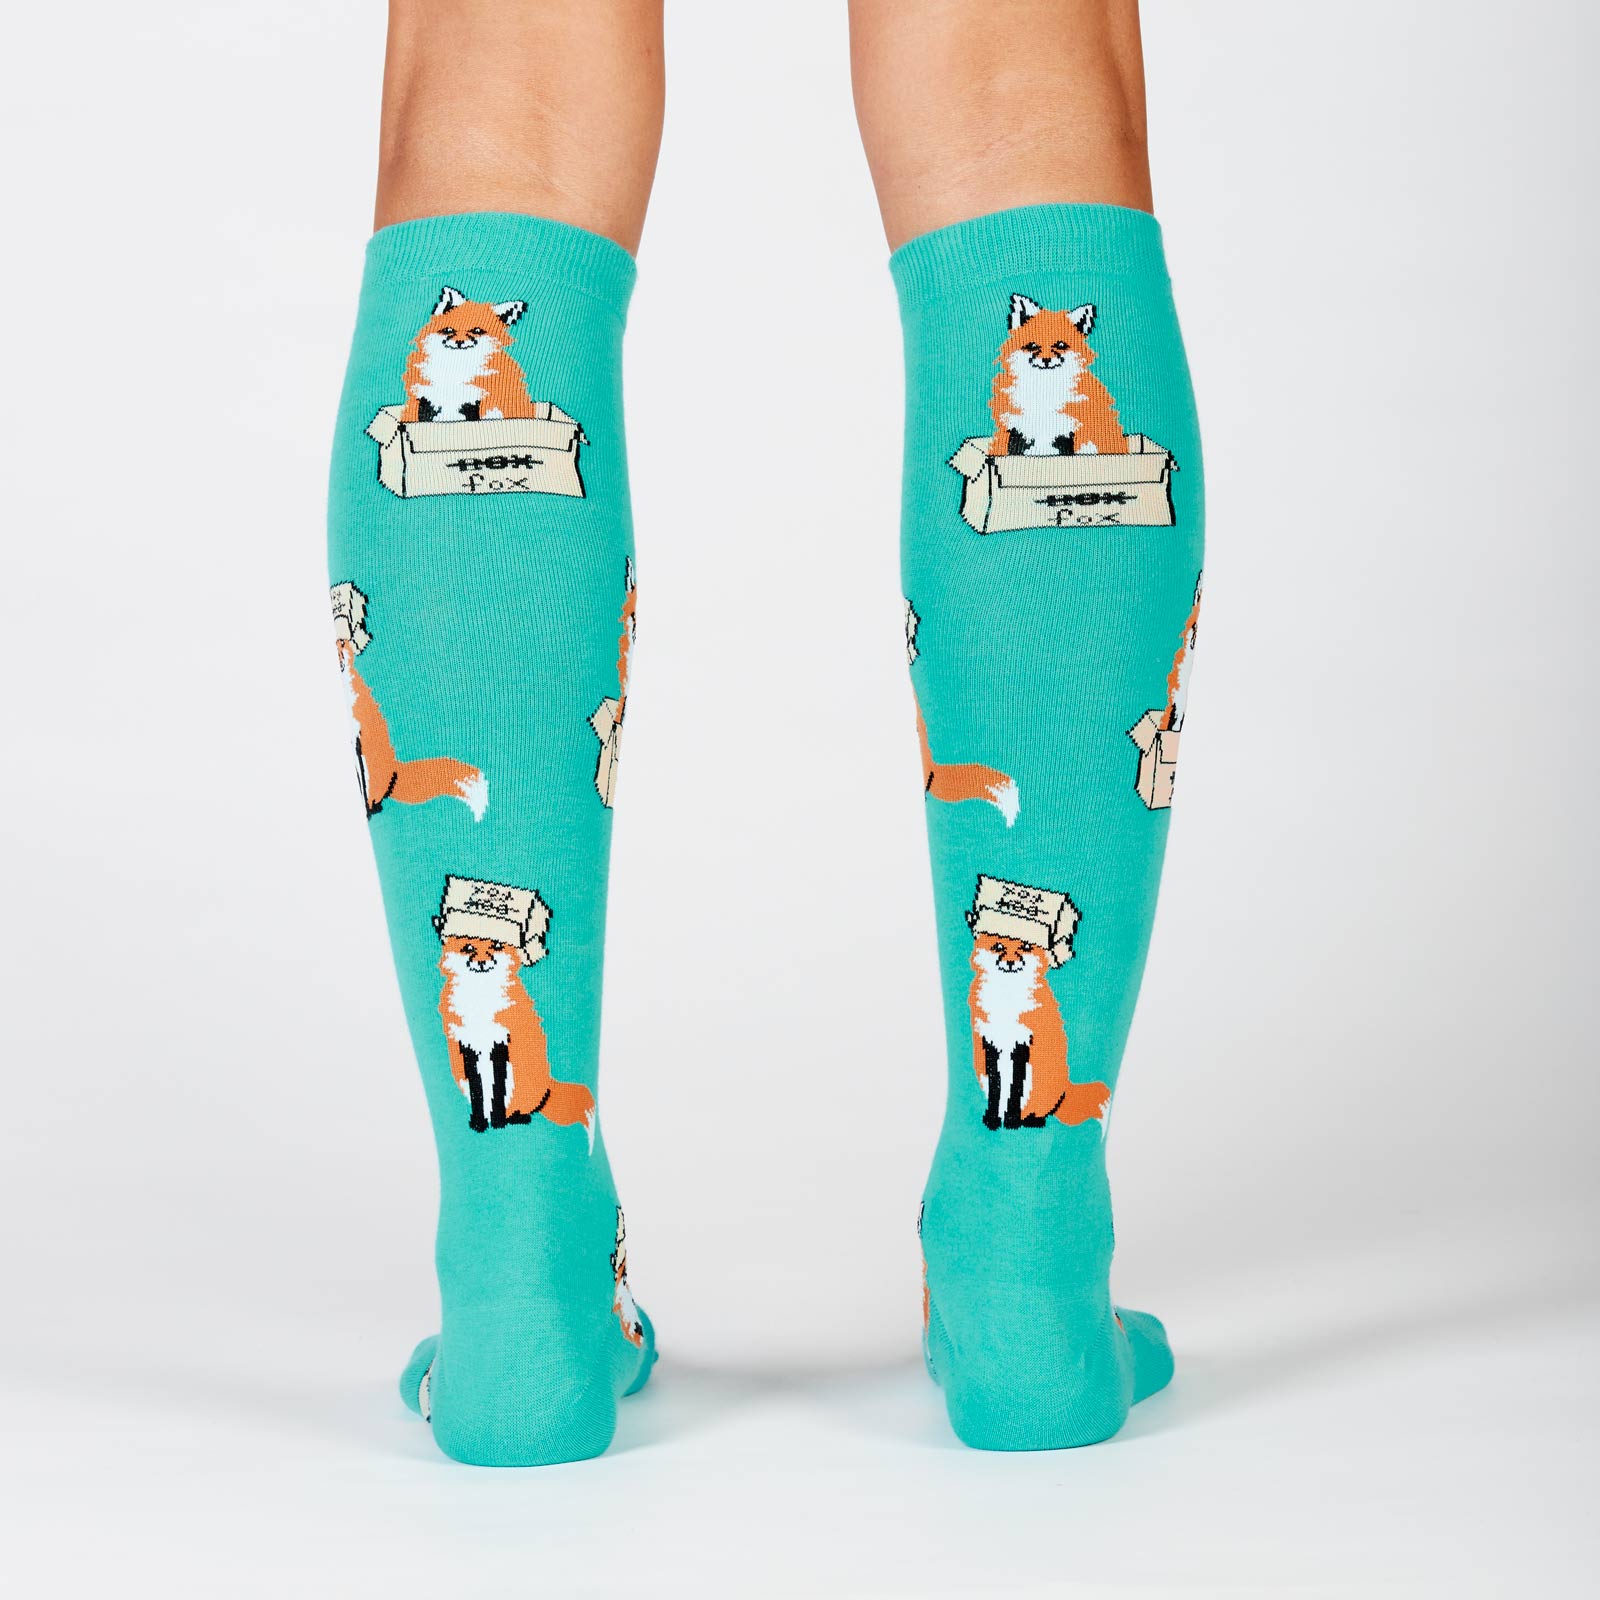 Foxes in Boxes Women's Socks by Sock it To Me - Compassionate Closet